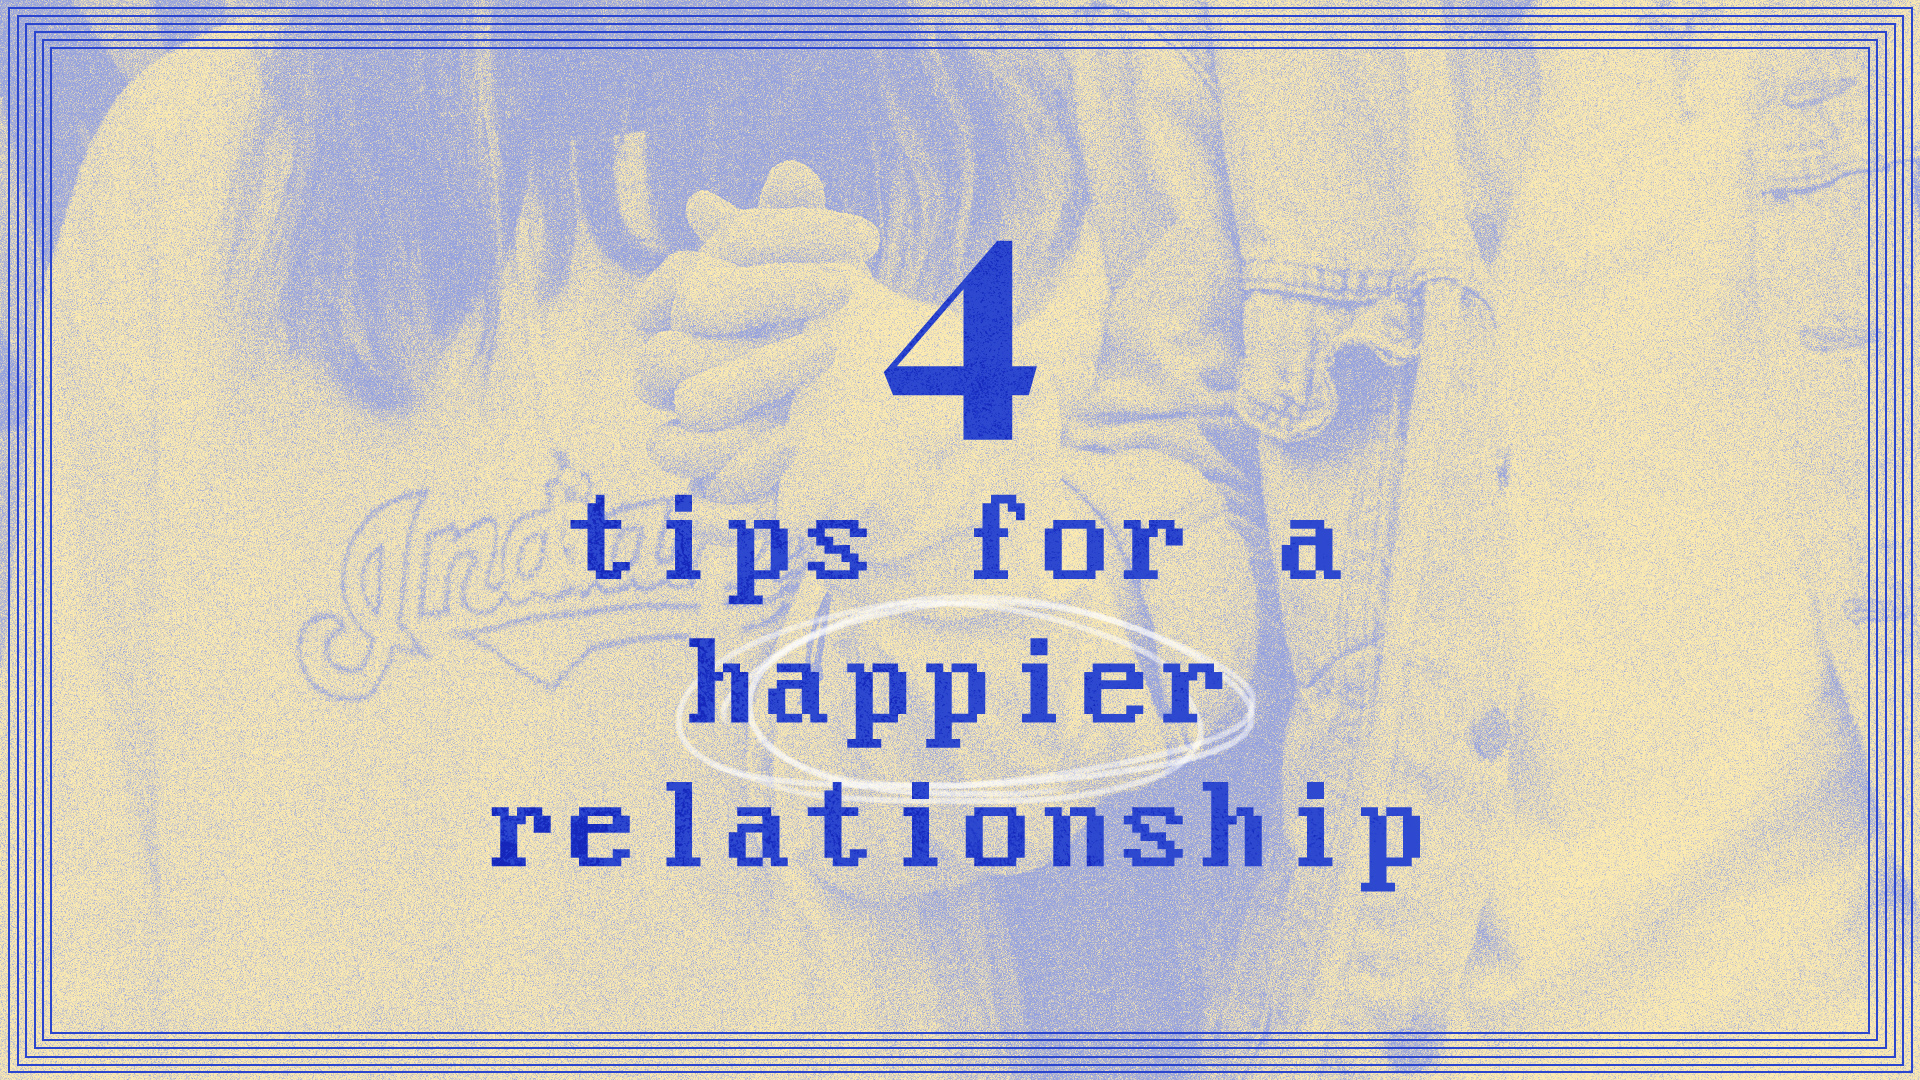 4 tips for a happier relationship